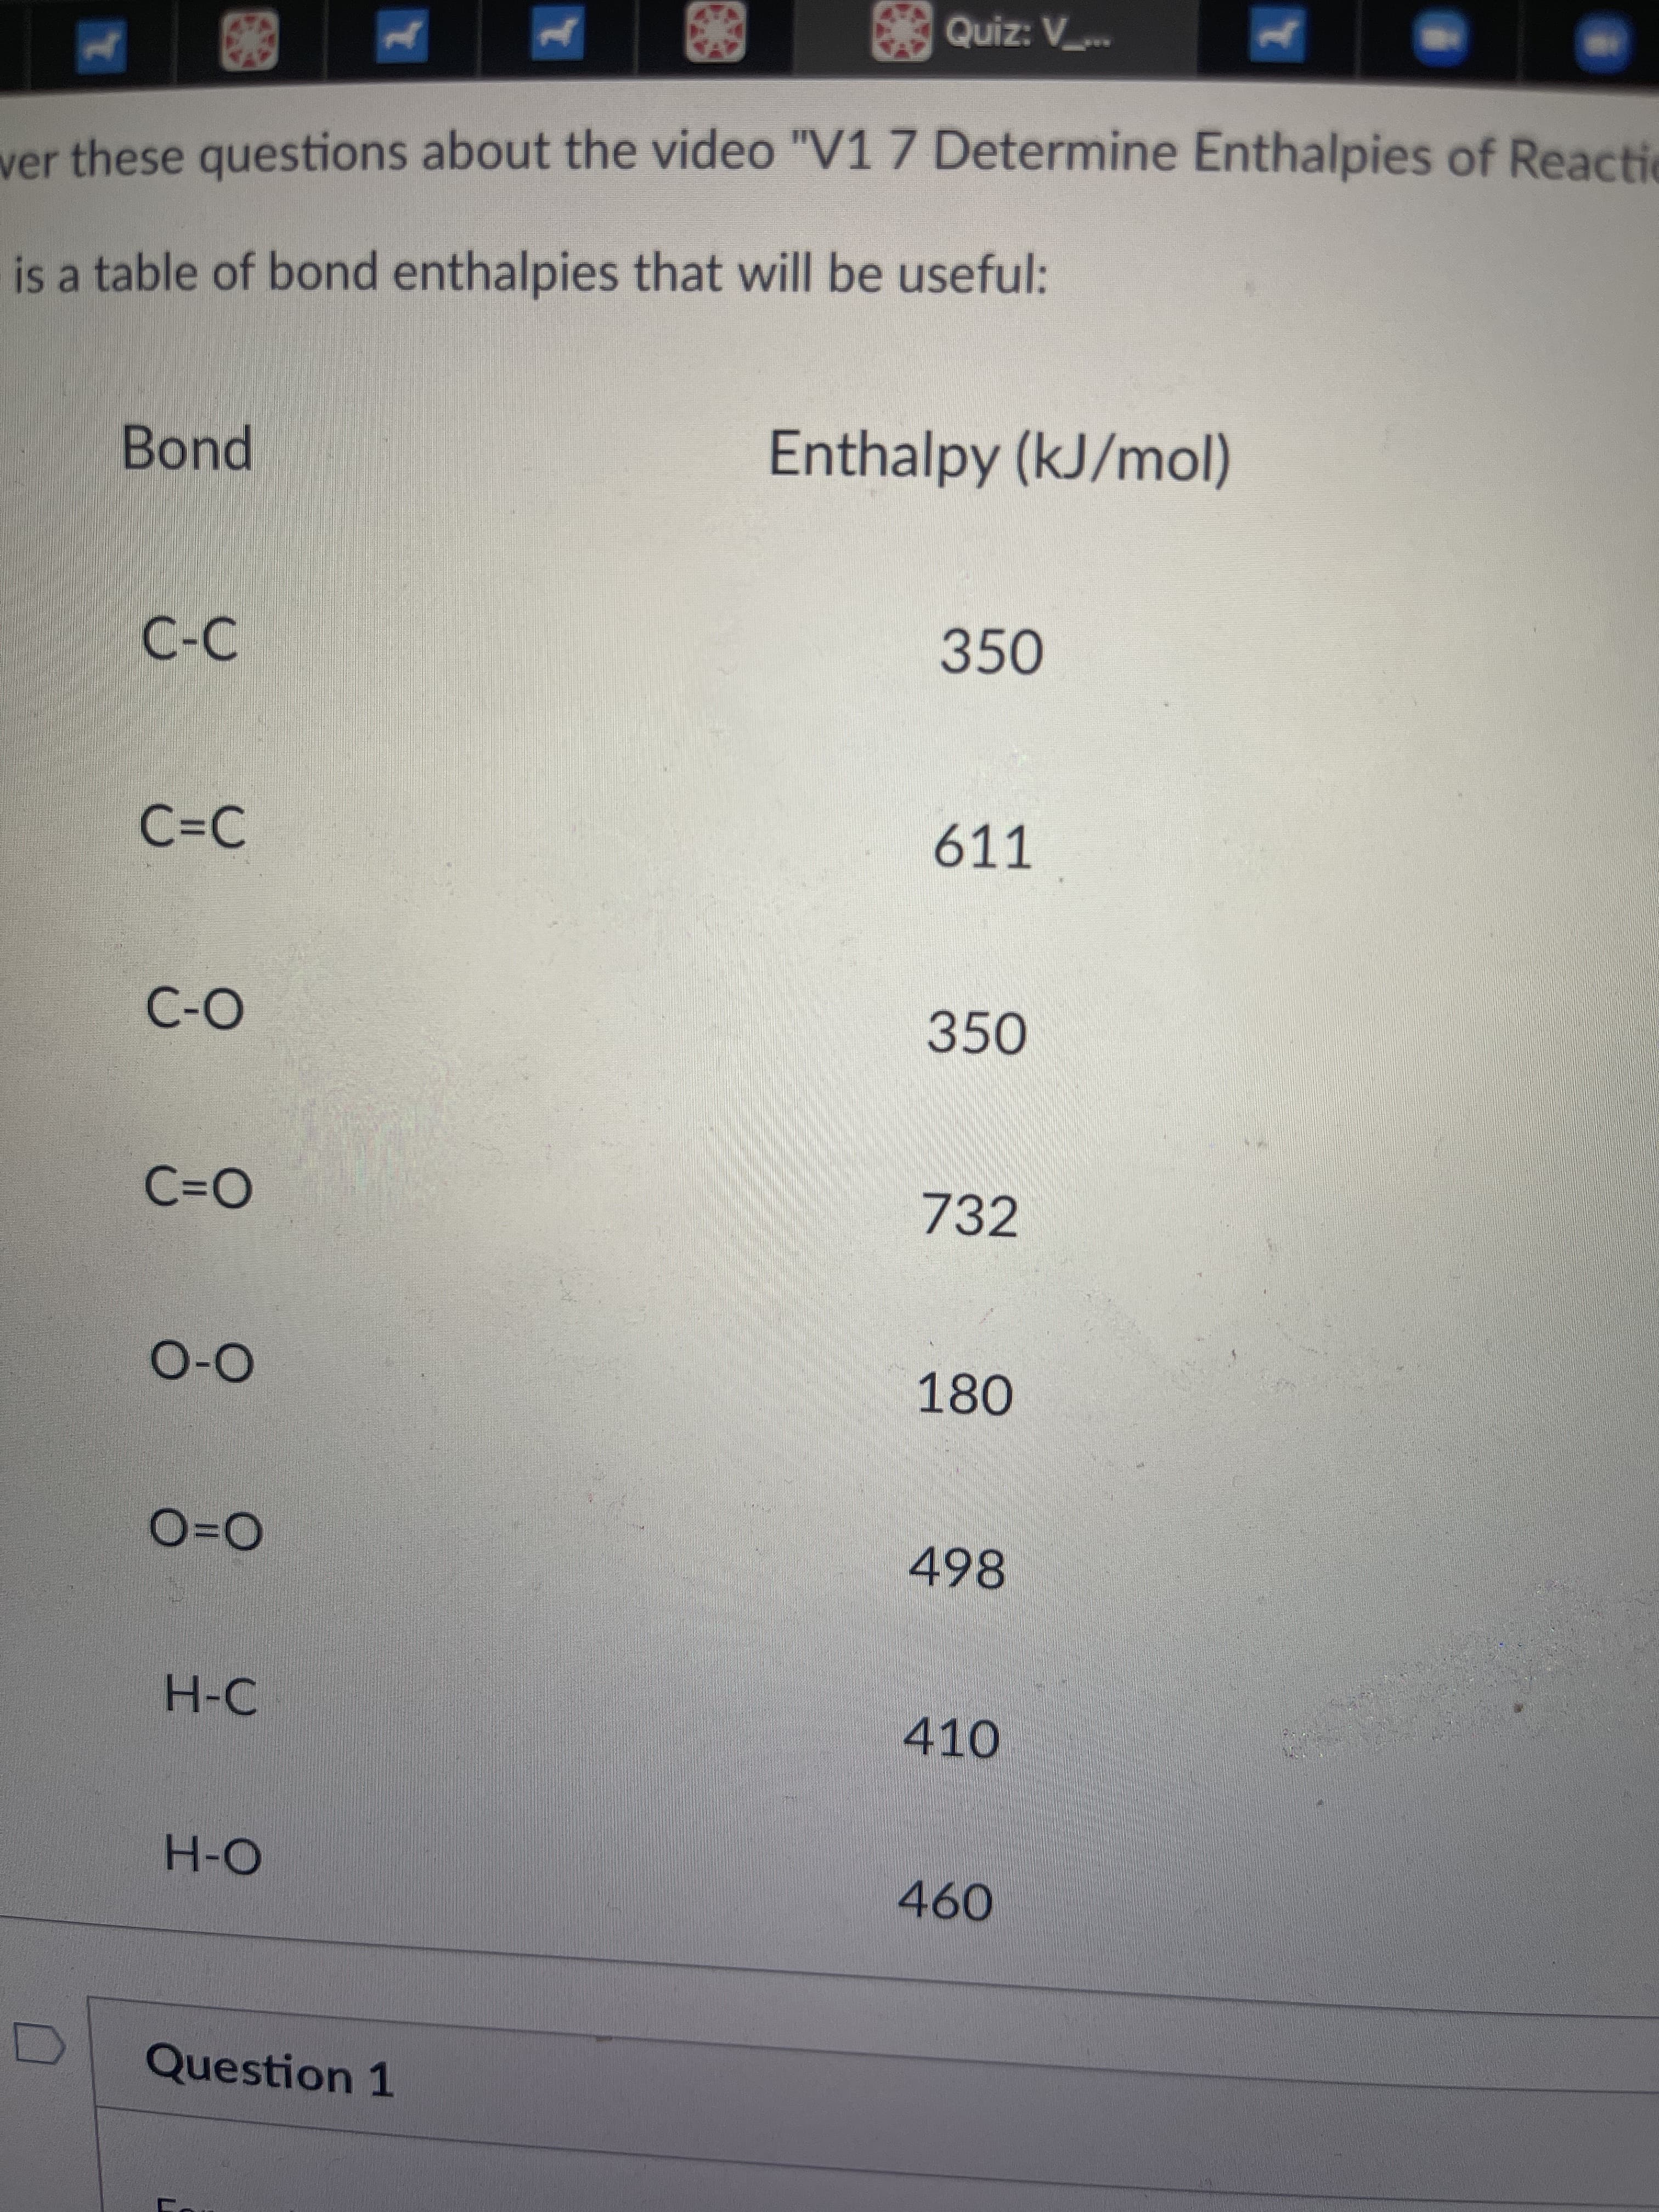 ver these questions about the video "V1 7 Determine Enthalpies of Reactic
is a table of bond enthalpies that will be useful:
Bond
Enthalpy (kJ/mol)
350
C=C
611
350
732
180
498
H-C
410
H-O
0460
Question 1
